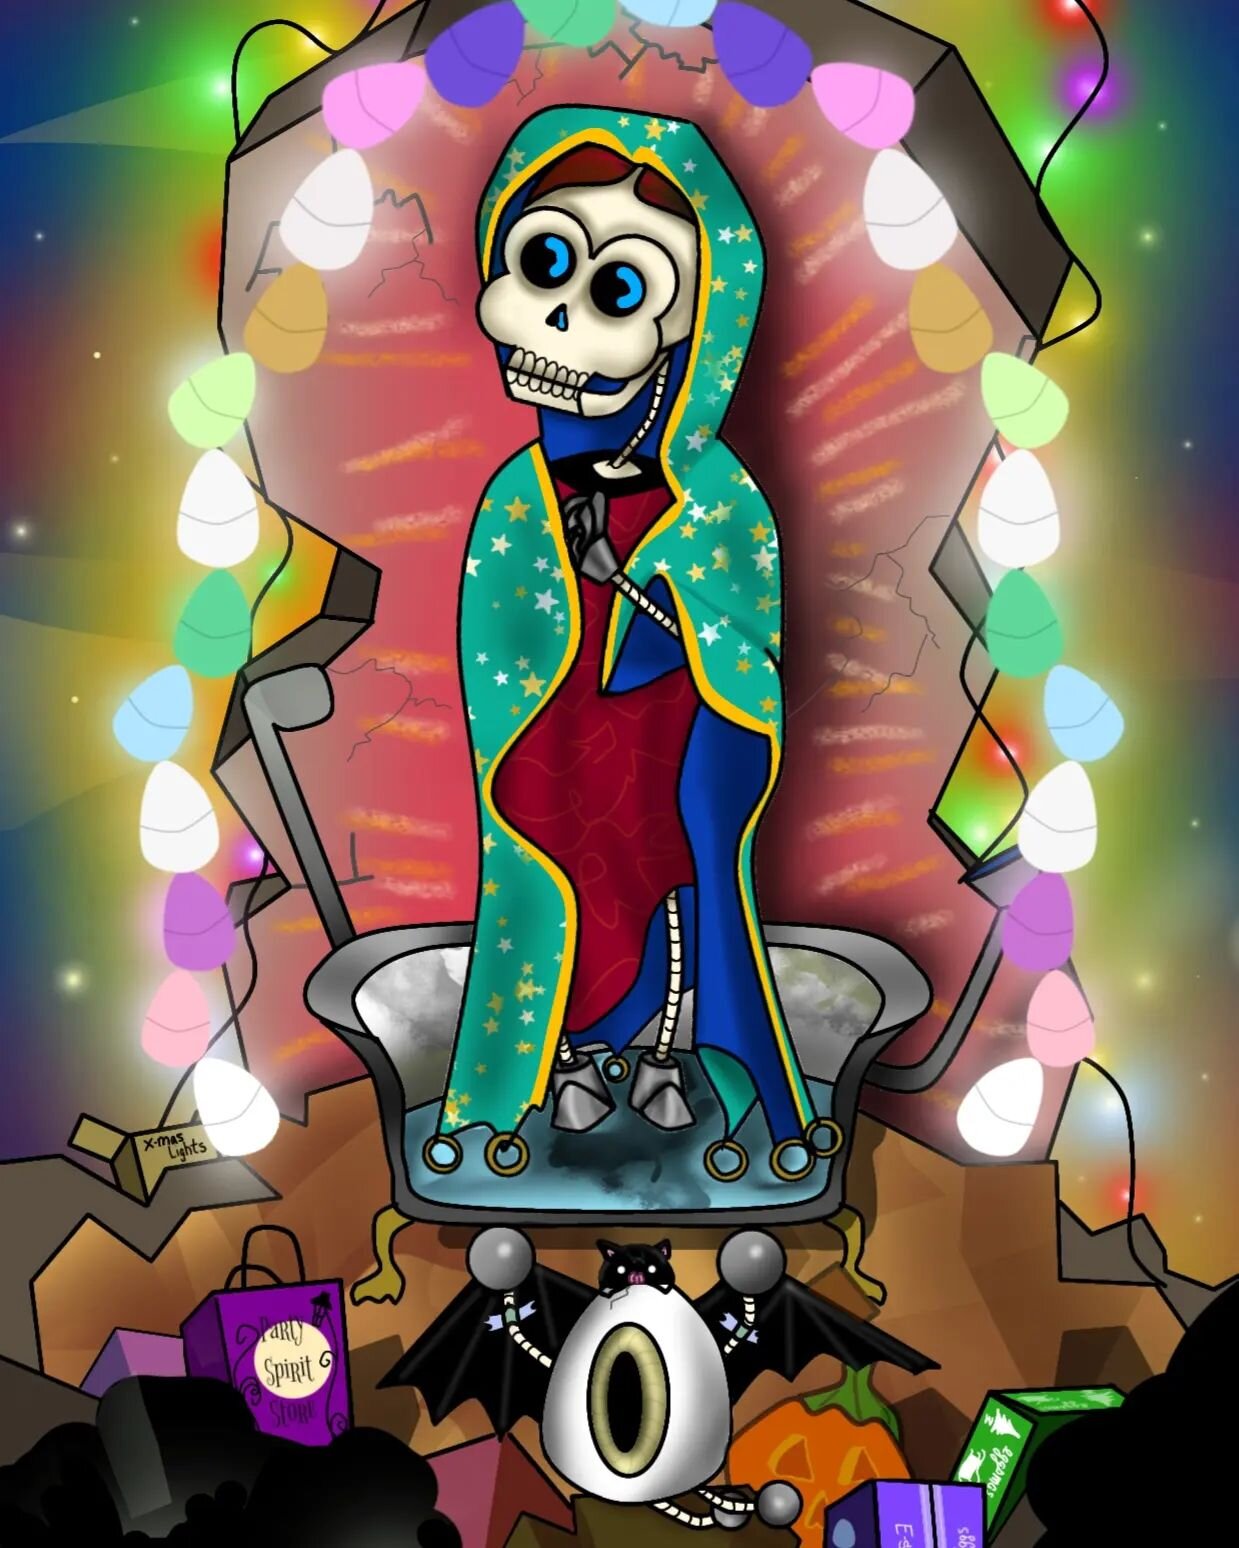 In the future rubble of a party and holiday super store, the bots and Keith recreate la Virgen de Bot-alupe.

#SKELLYBOTS #skeletons #calacas #calaveras #virgindeguadalupe #virginmary #party #holidays #stars #eggs #lights #drawing #digitaldrawing #di